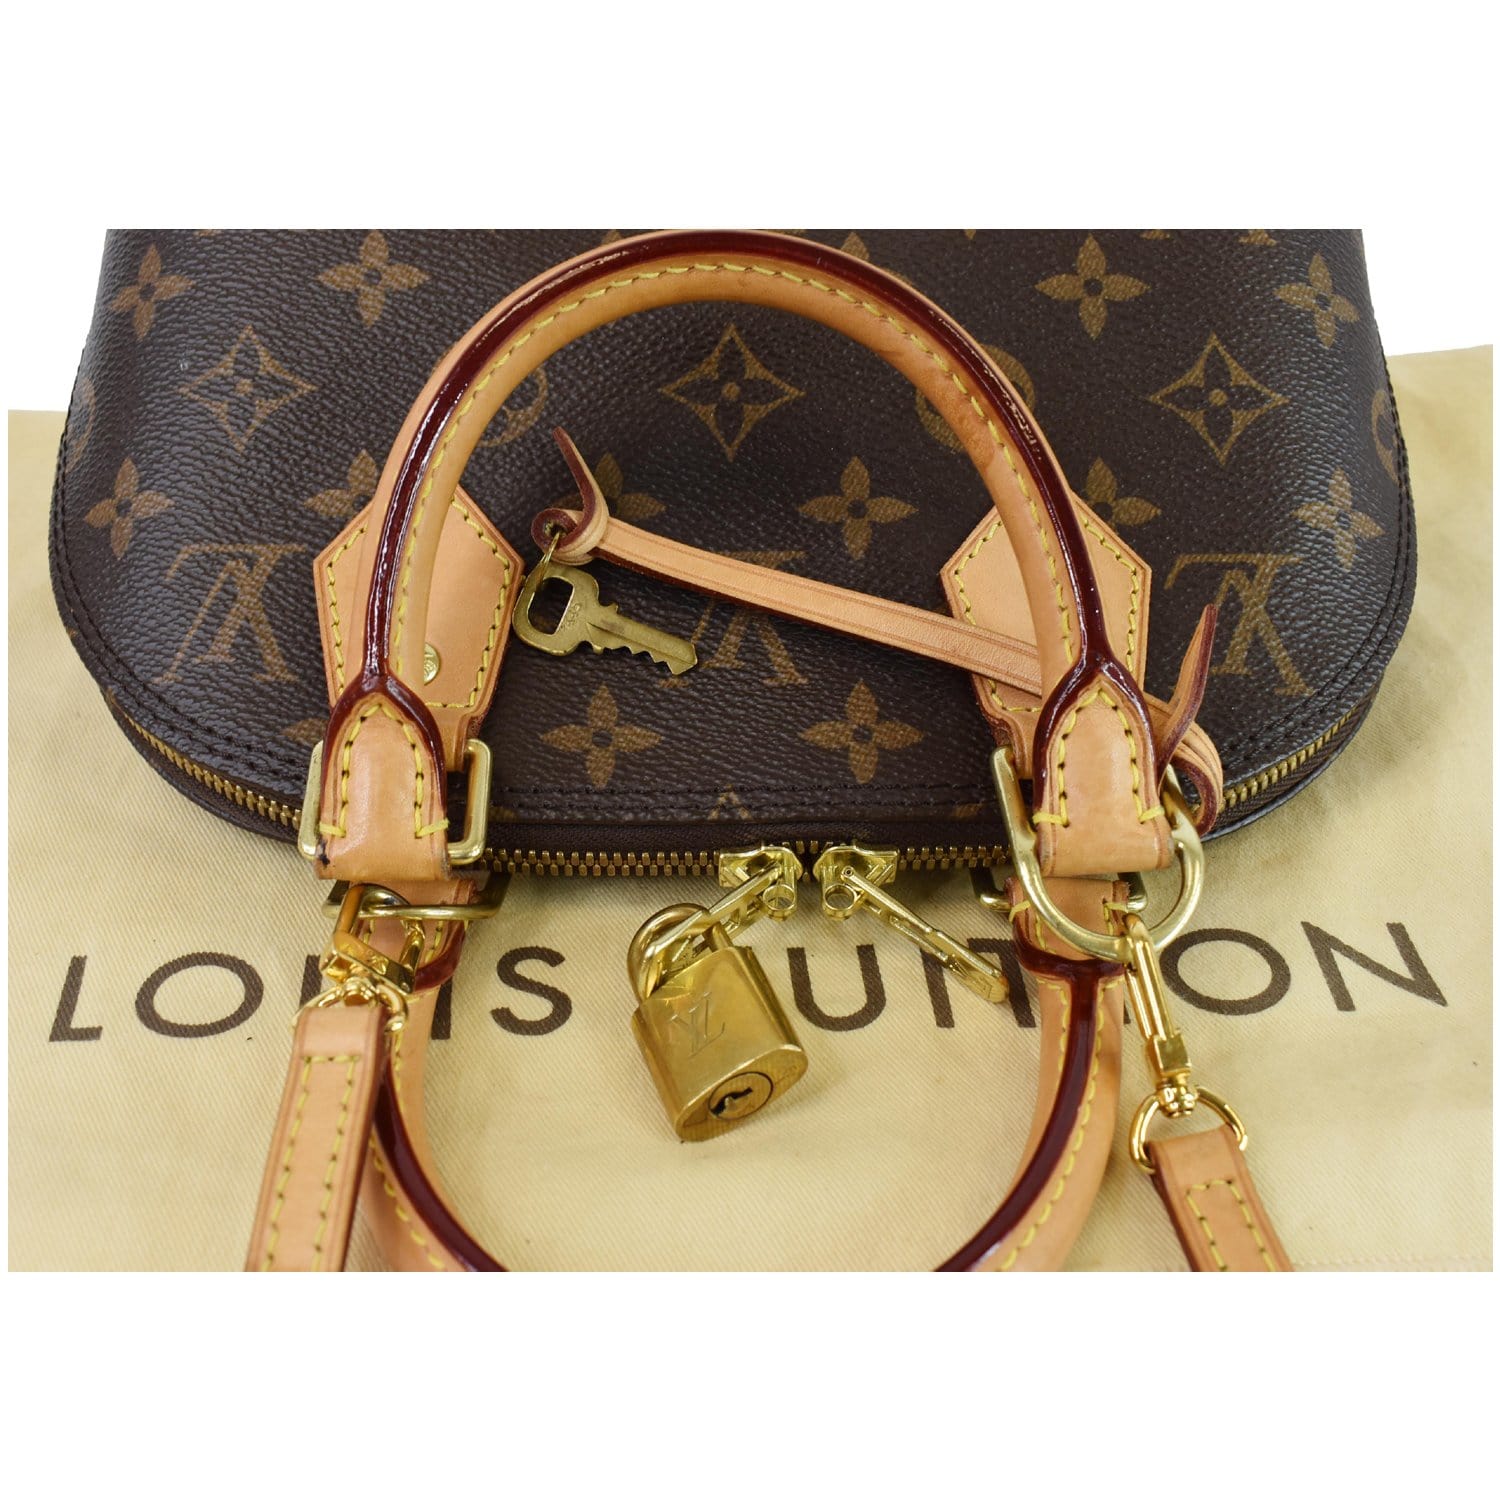 Wish & Win on Instagram: “Win this beautiful bag, two prints to choose  from. Louis Vuitton Alma BB in monogram canvas or …